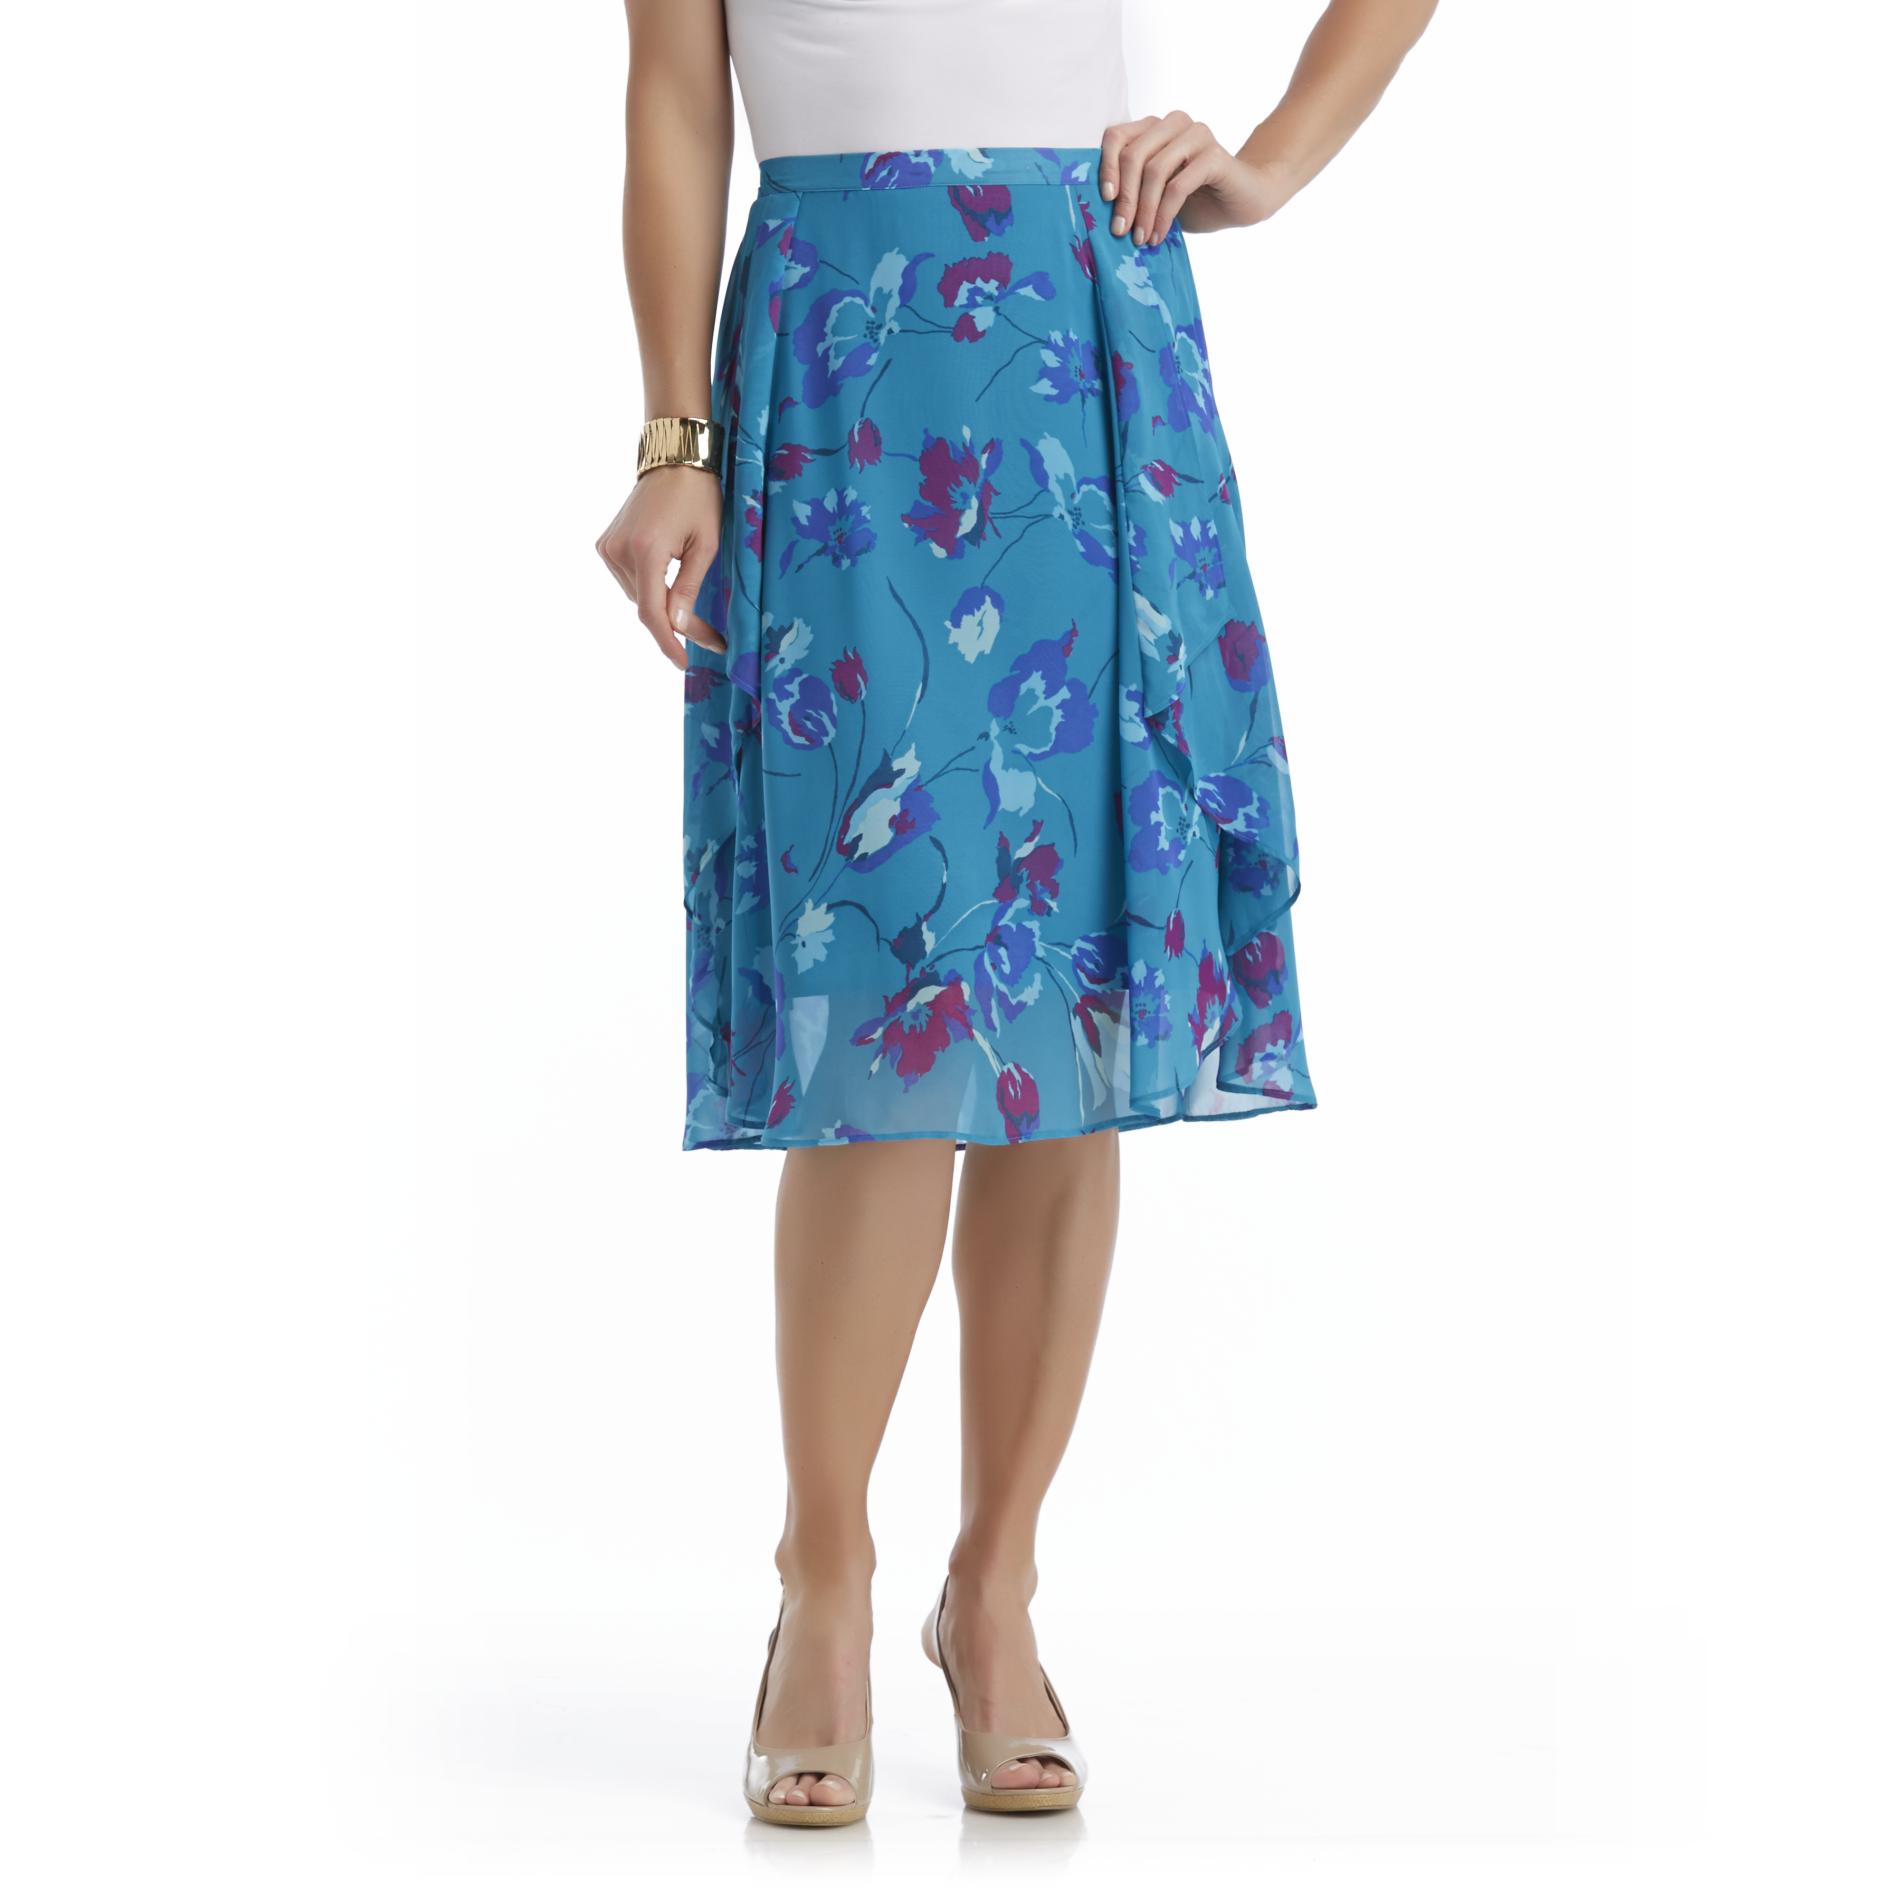 Jaclyn Smith Women's Skirt - Floral